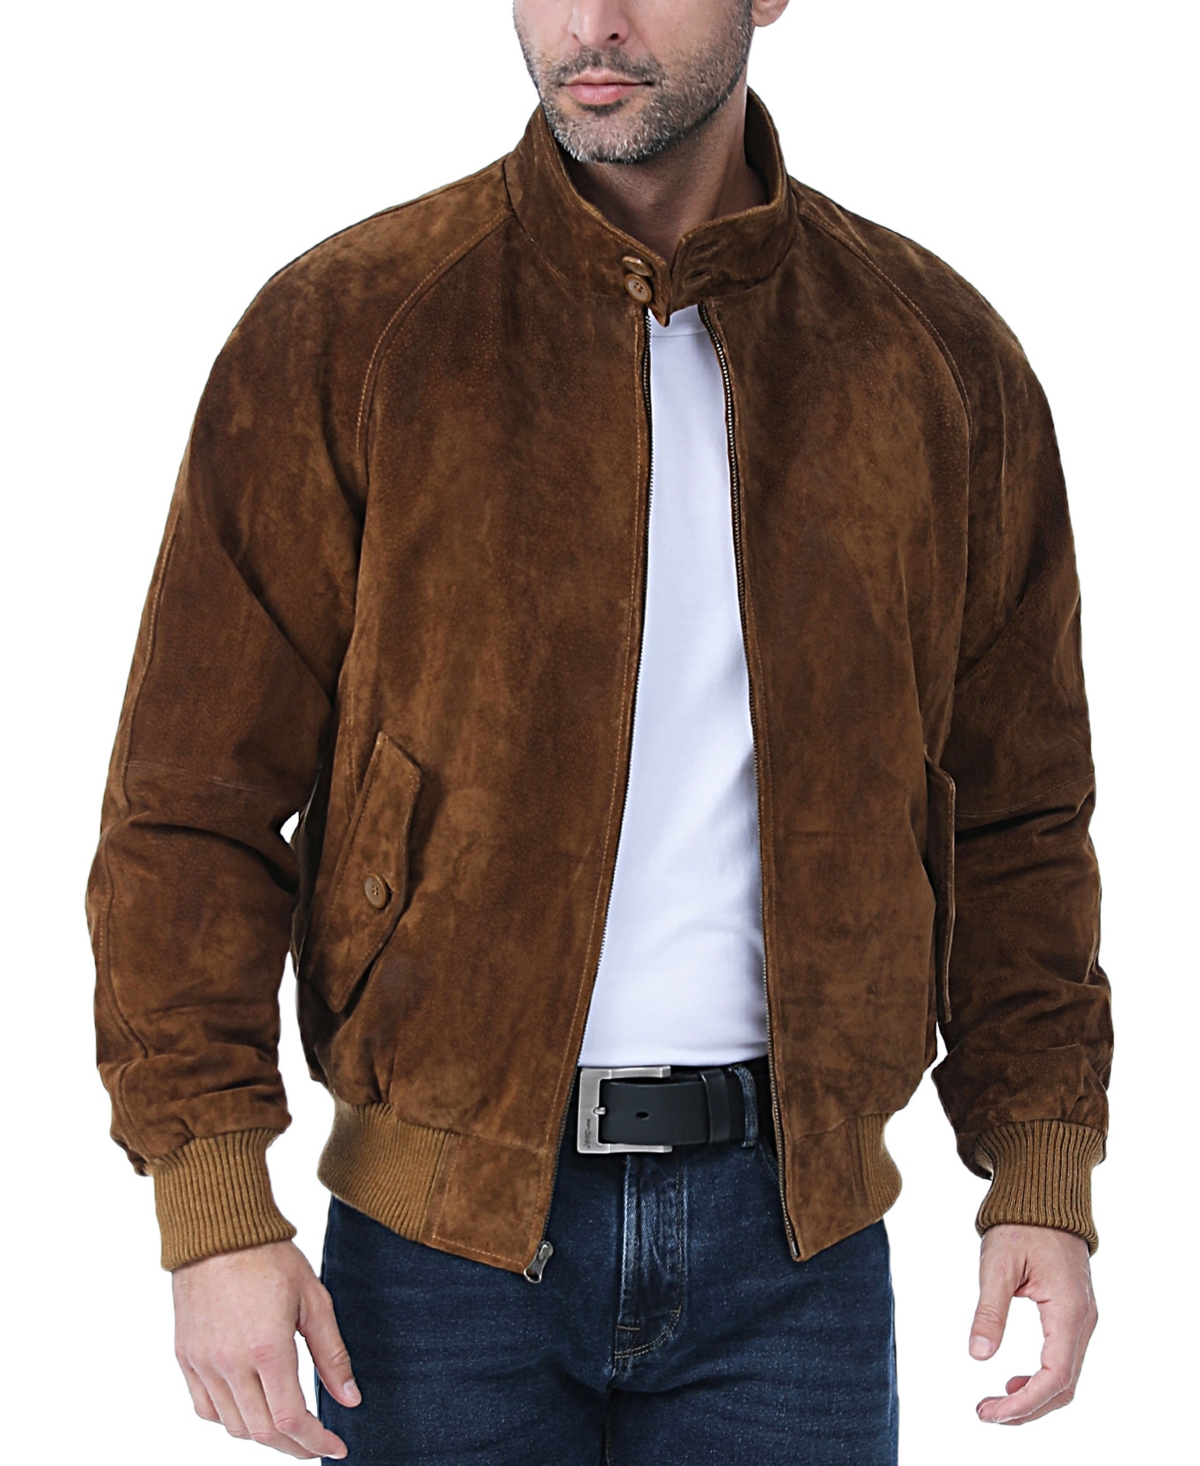 Men Wwii Suede Leather Bomber Jacket - Tall - Tobacco